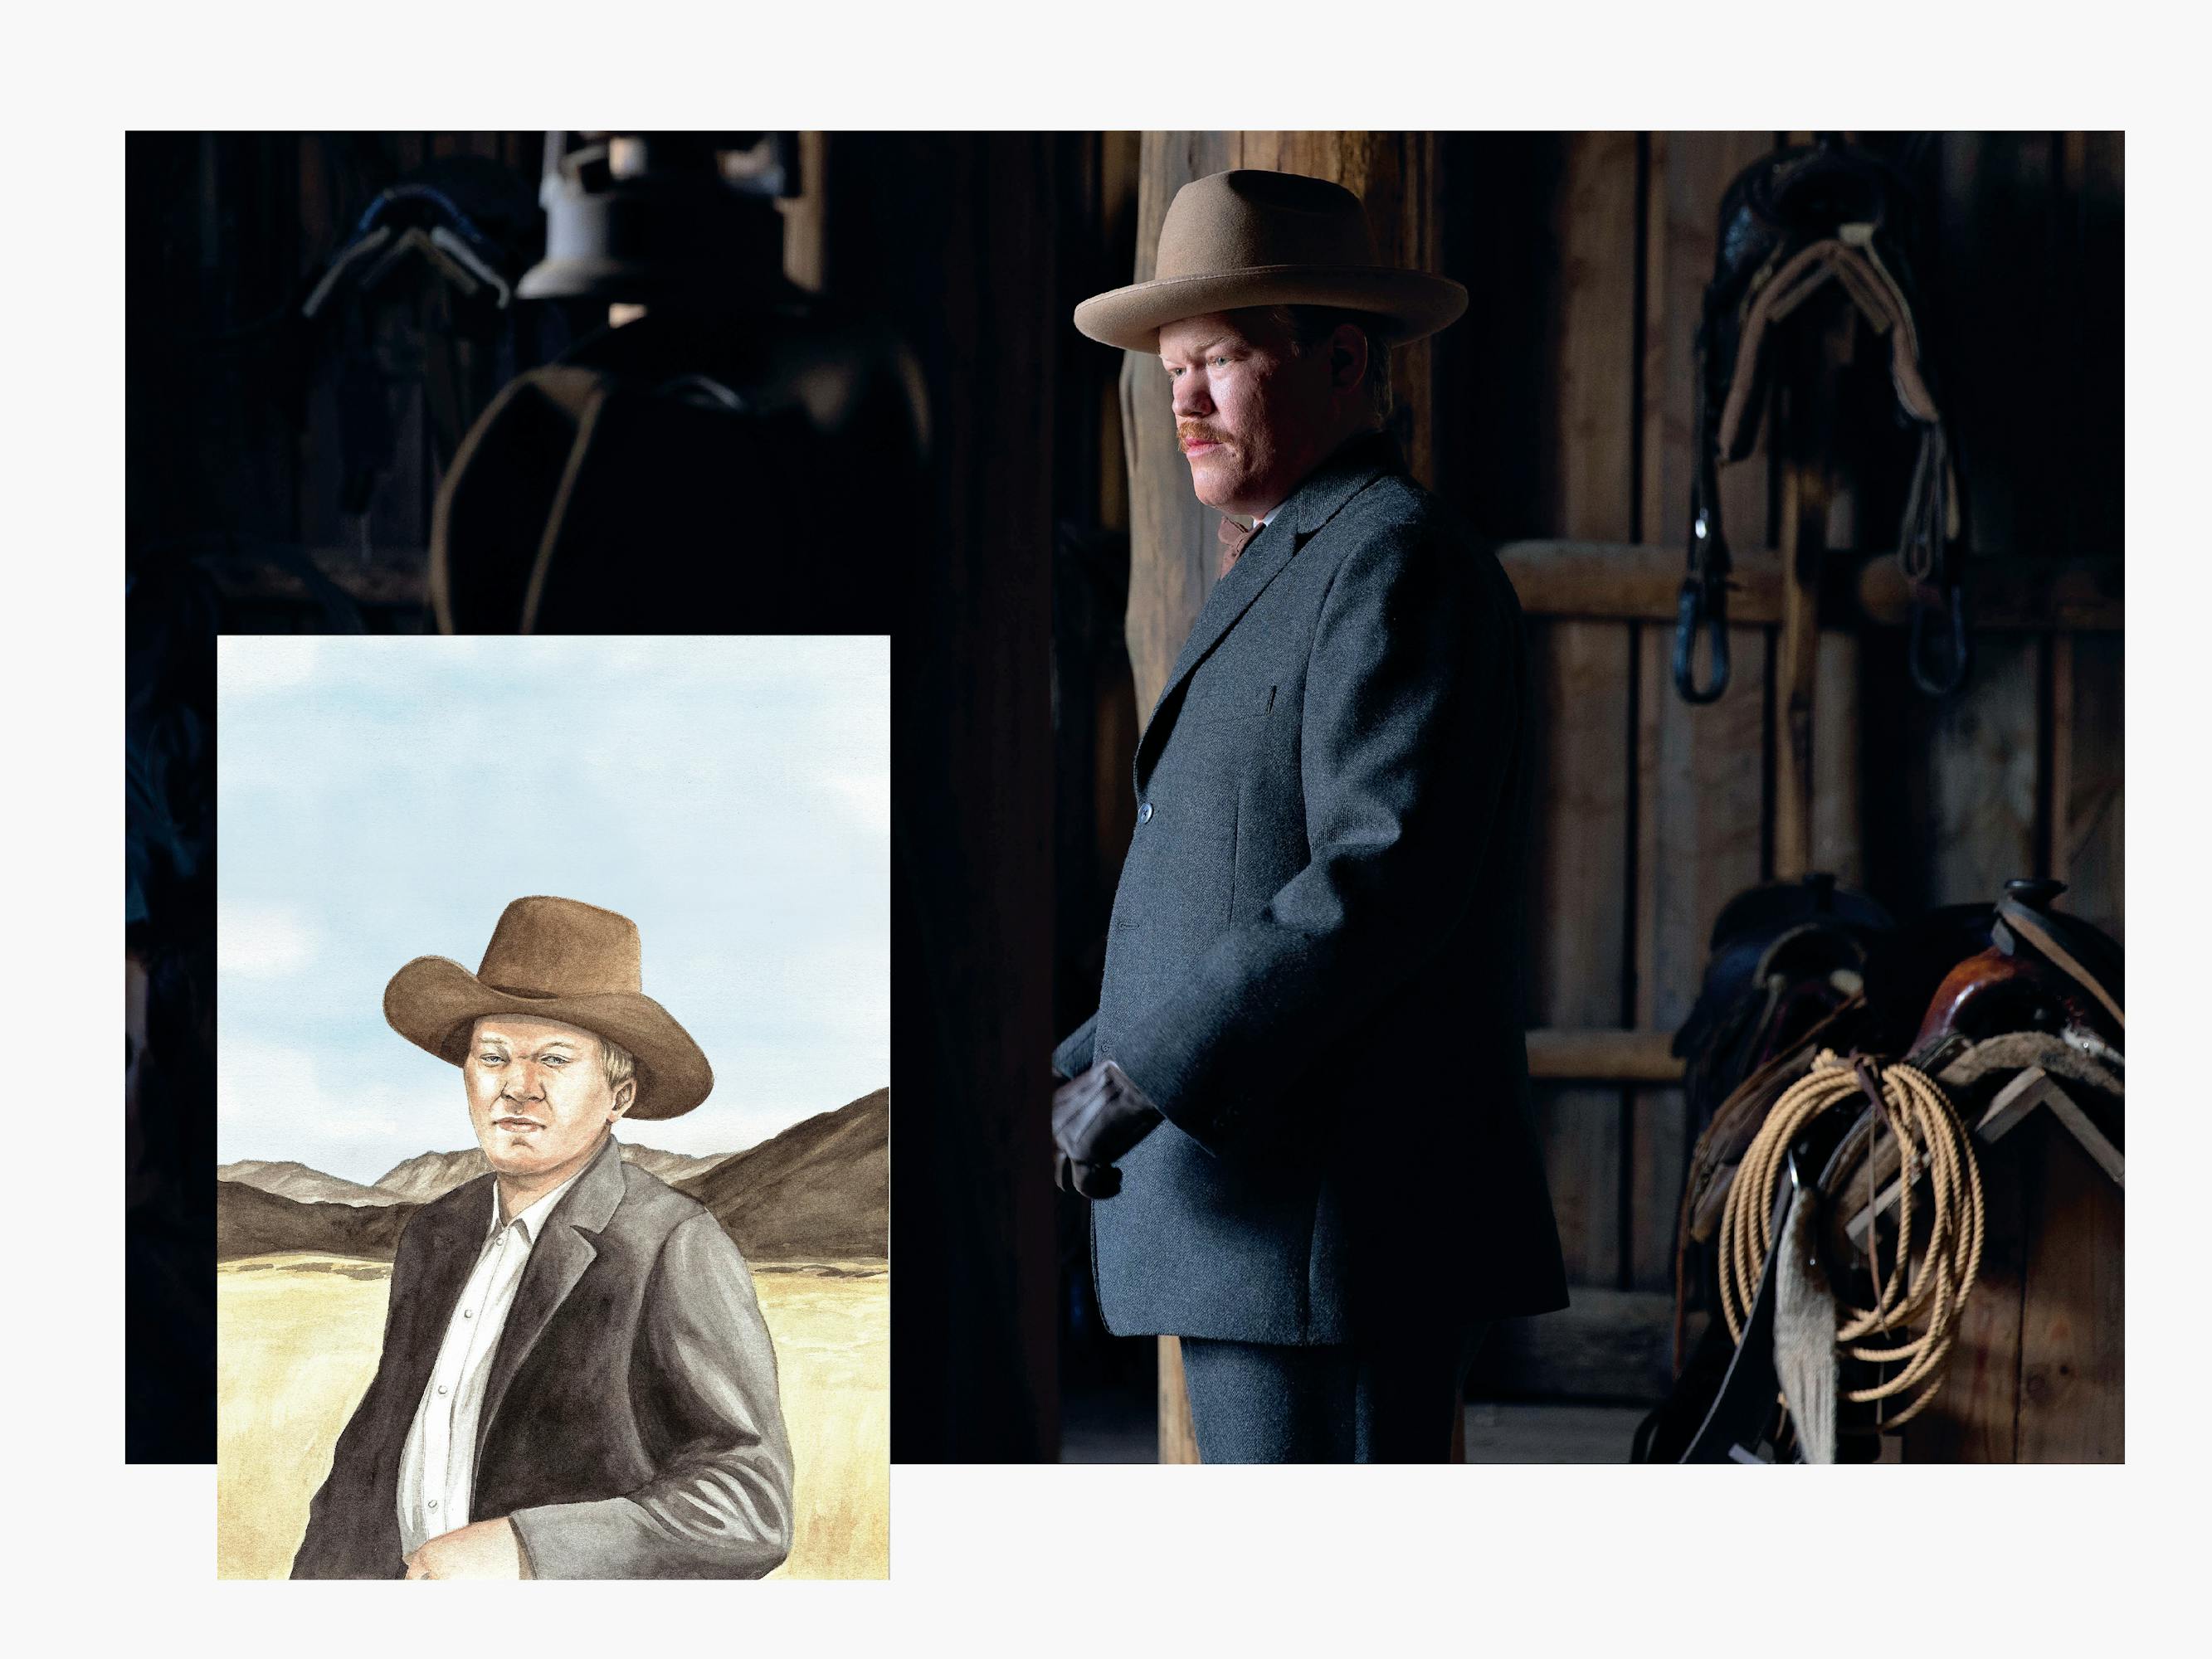 Jesse Plemons wears a grey suit and brown hat in a stable. In the bottom left is a sketch of Jesse in the same outfit.